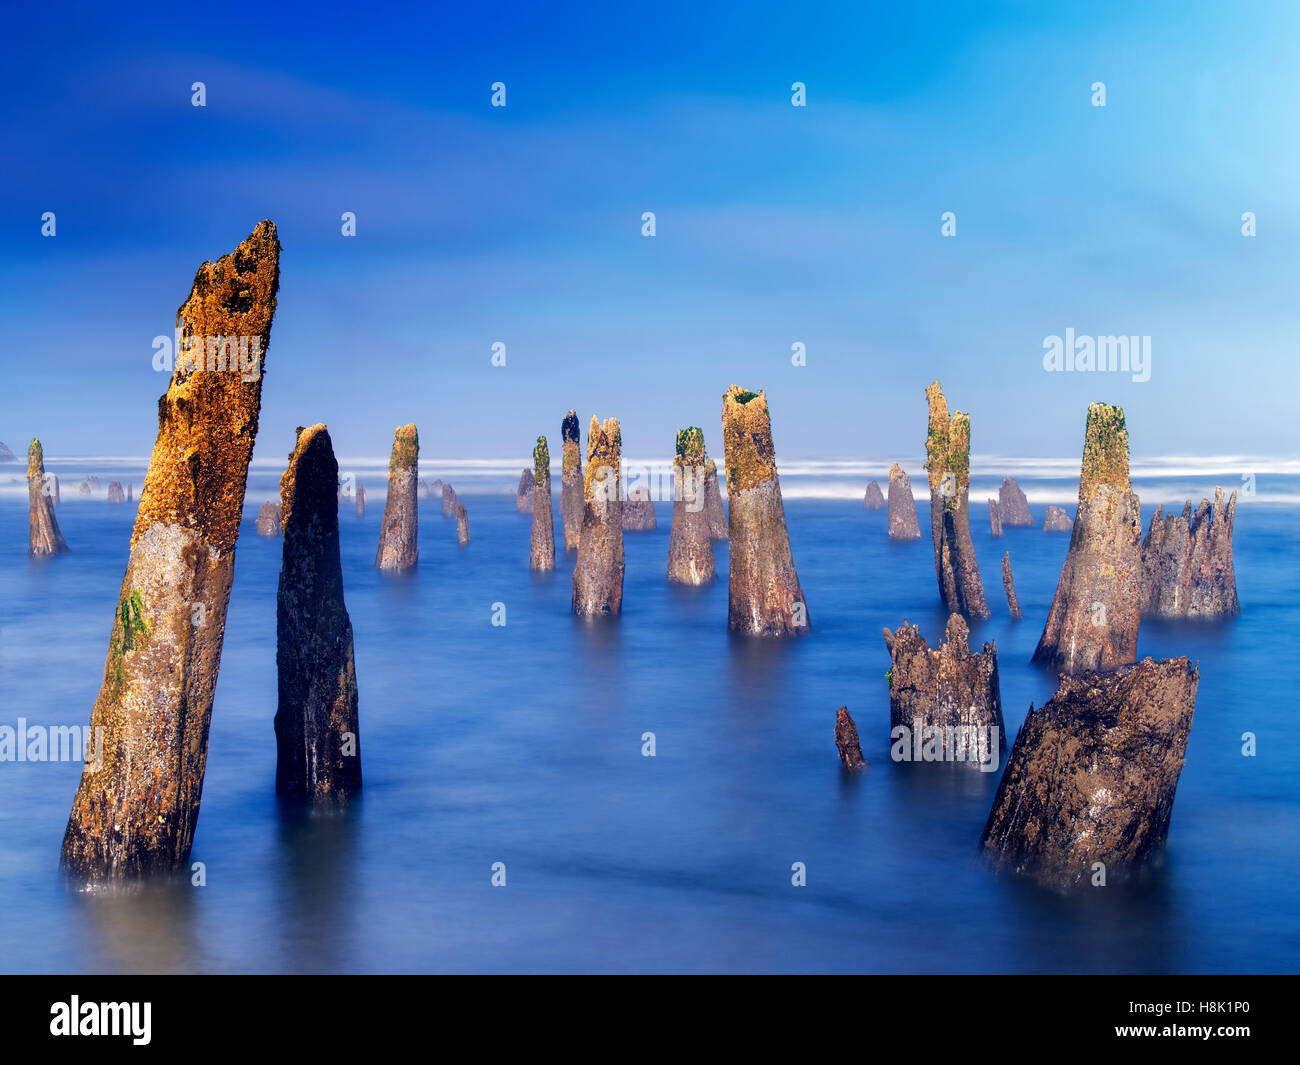 The Ghost Forest at an extreme minus tide.and fog. Neskowin, Oregon Stock Photo